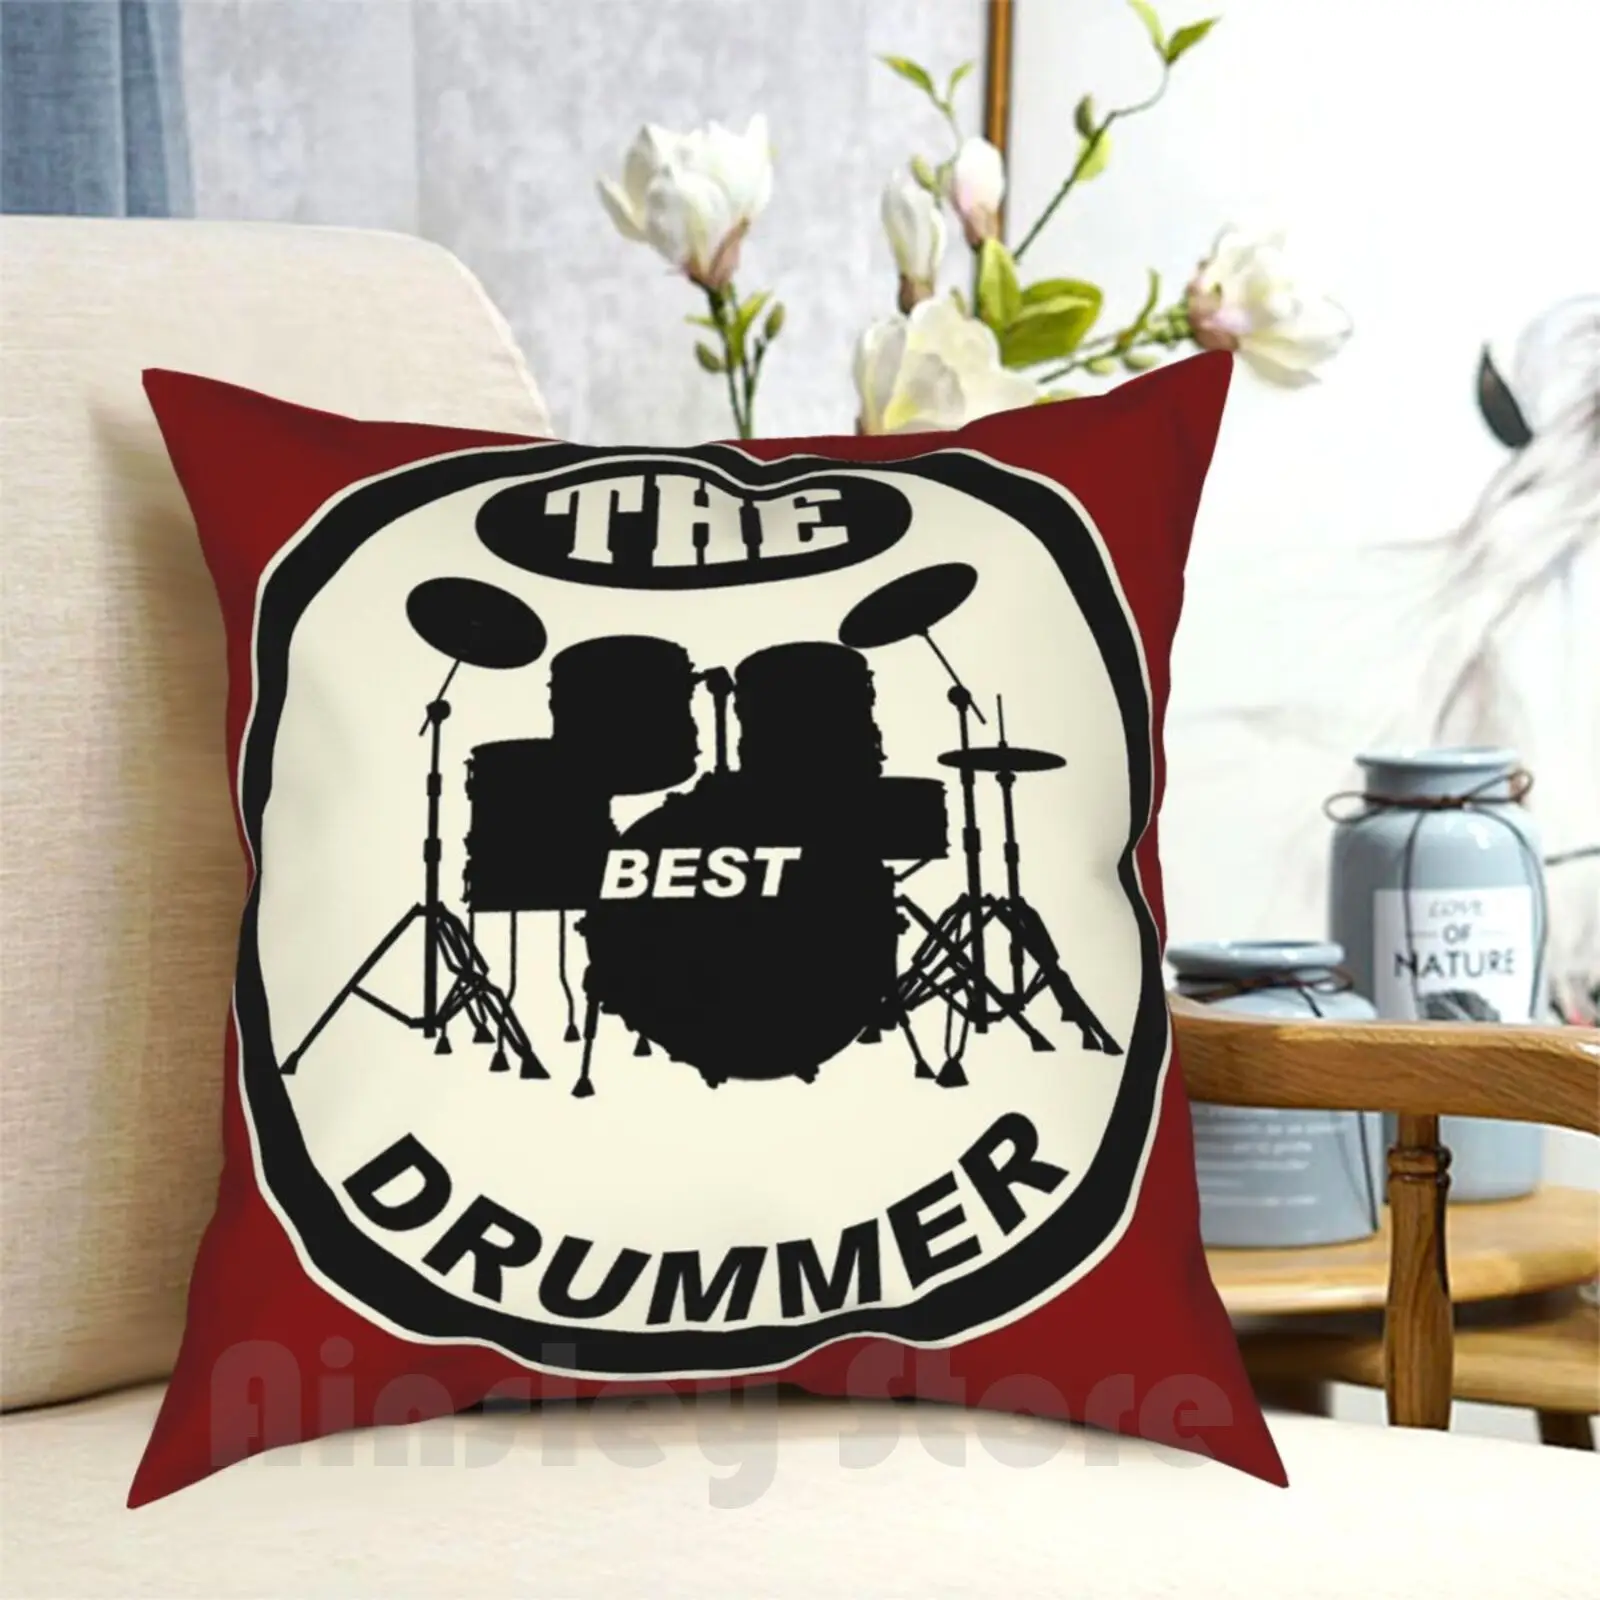 

The Best Drummer White Black Pillow Case Printed Home Soft Throw Pillow Drummer Drums Drum Percussion Musician Music